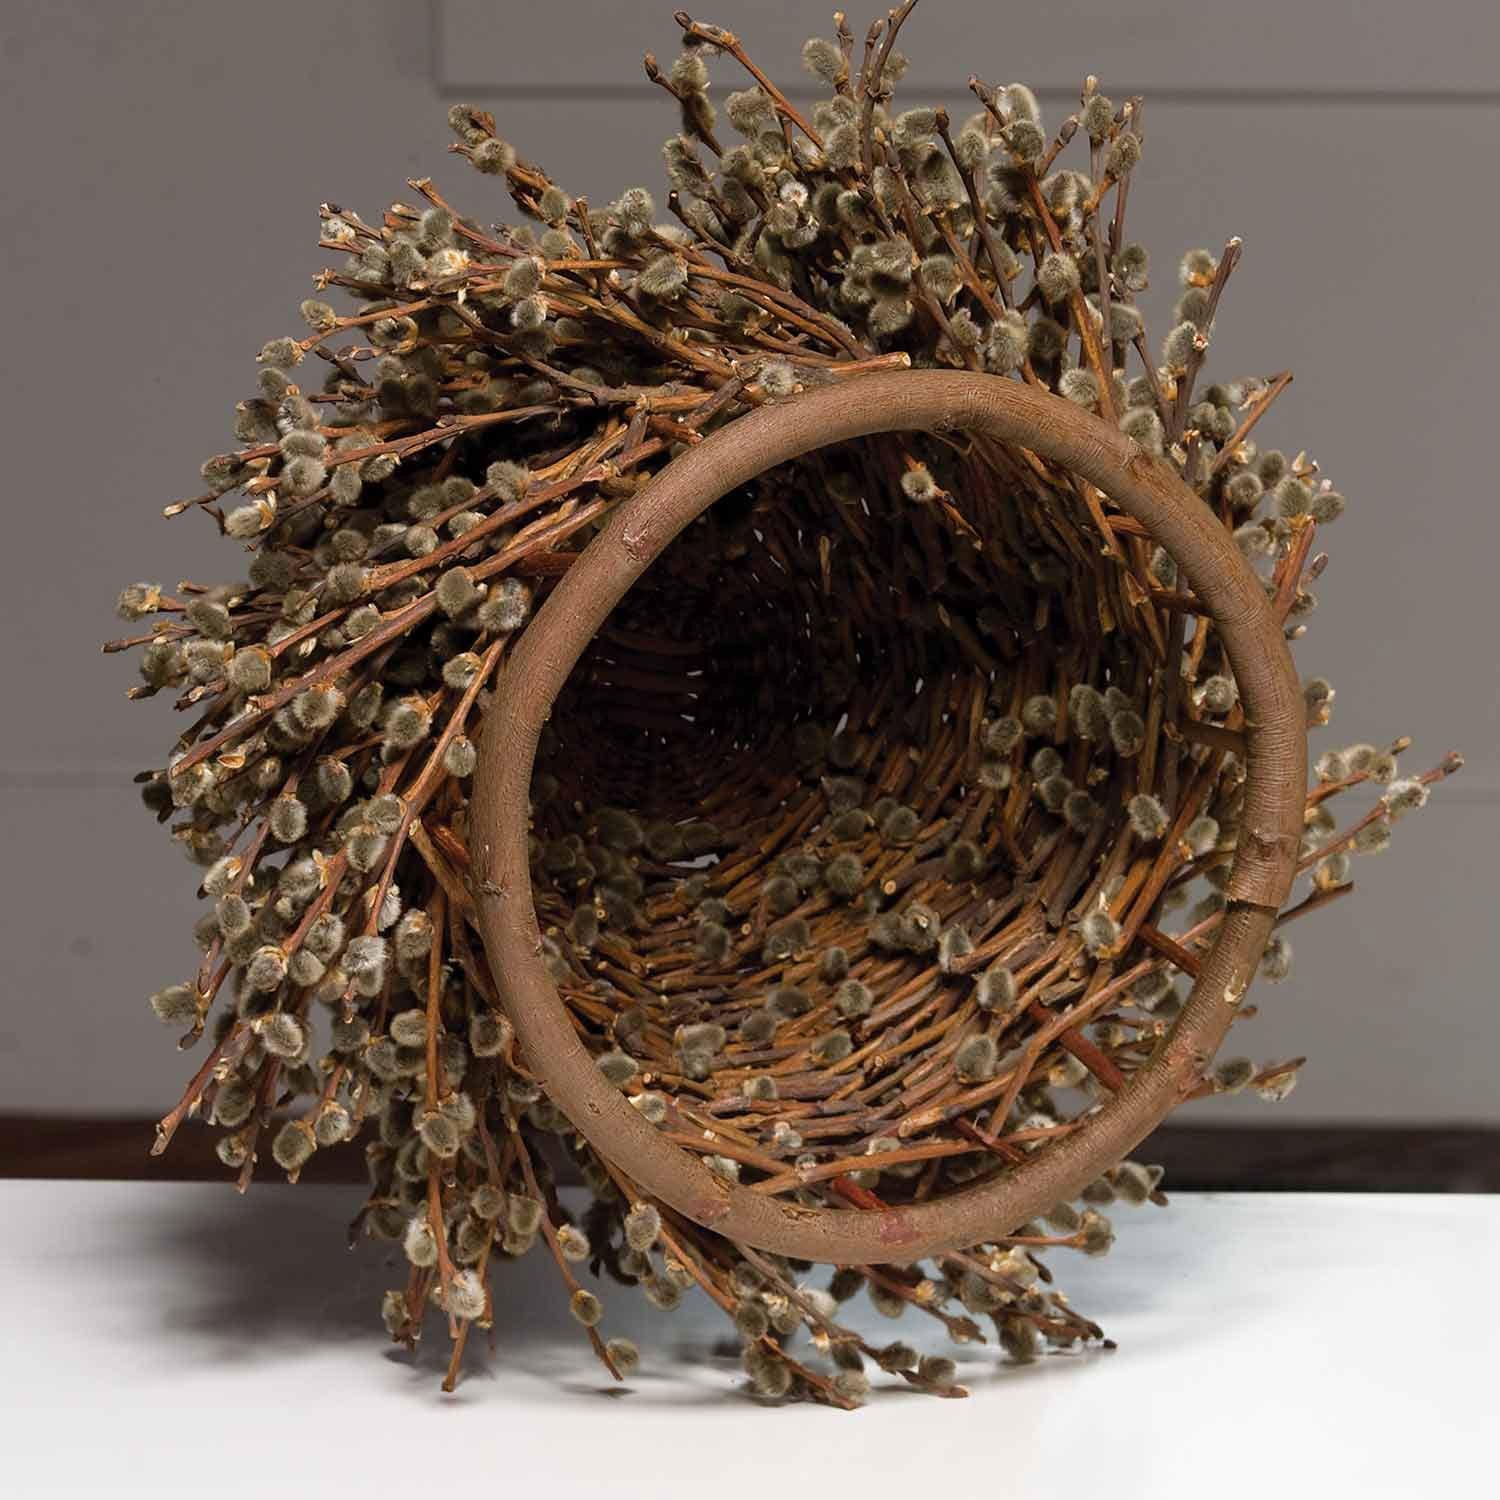 Kosonen's Pussy Willow X can be displayed on a surface as a vessel, or be mounted as a wall sculpture.

Wood was integral to the artistic practice of the late Markku Kosonen of Finland. An important aspect of his work was the ability to express